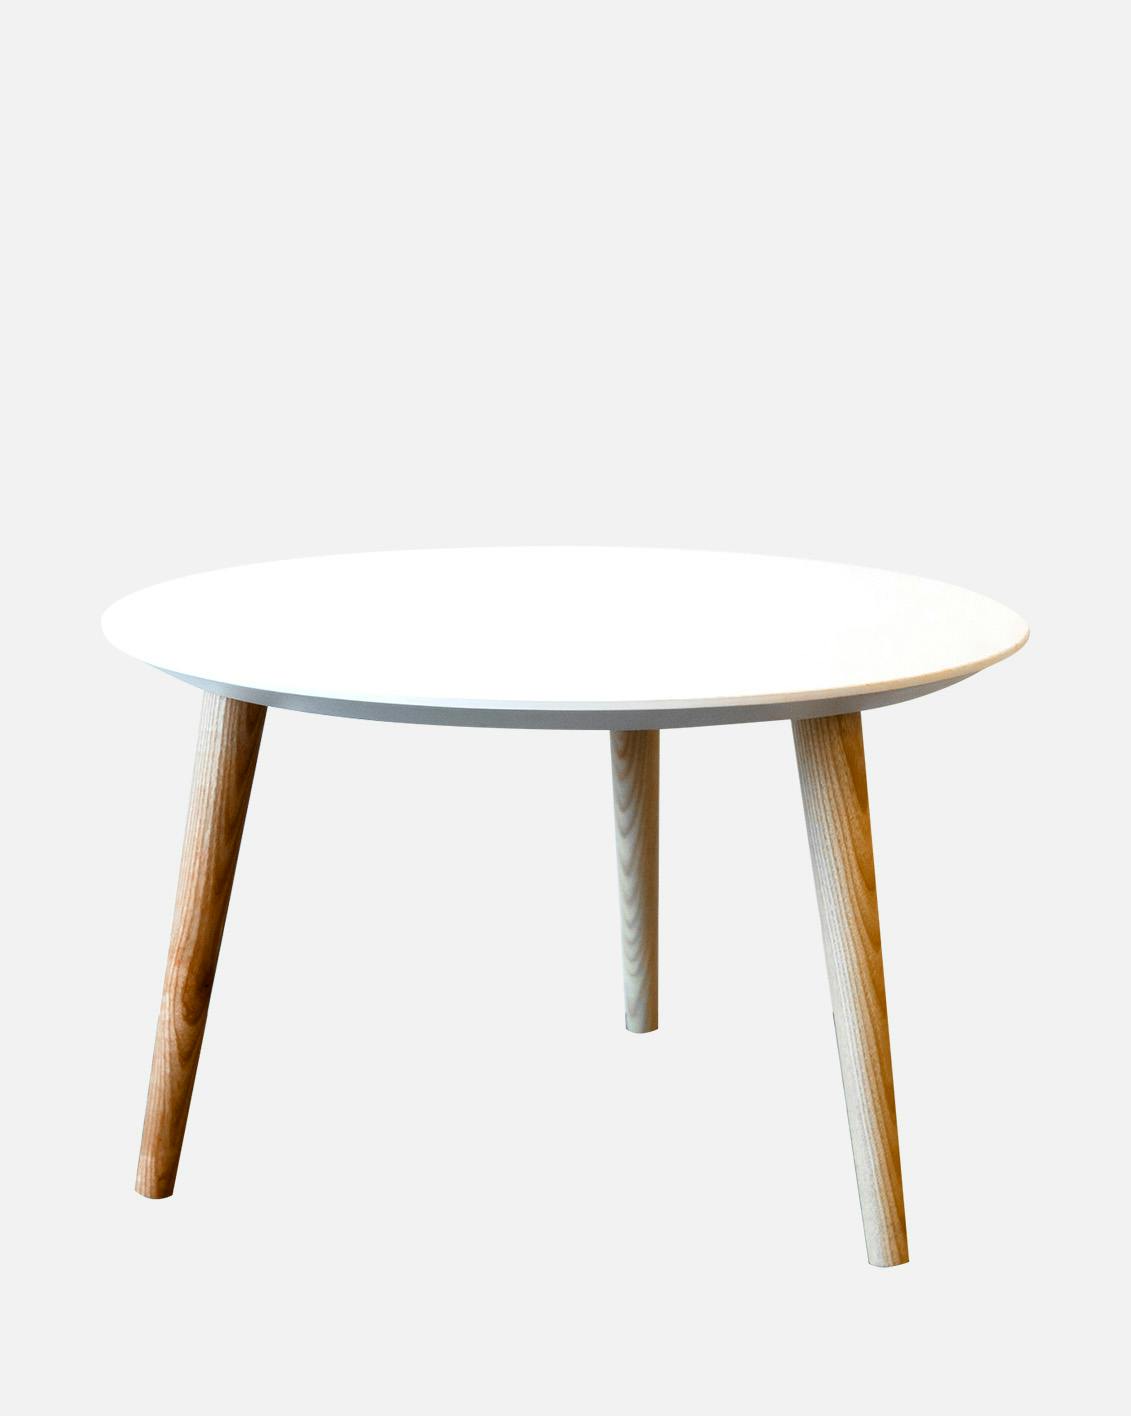 REL048 White coffe table with wodden legs